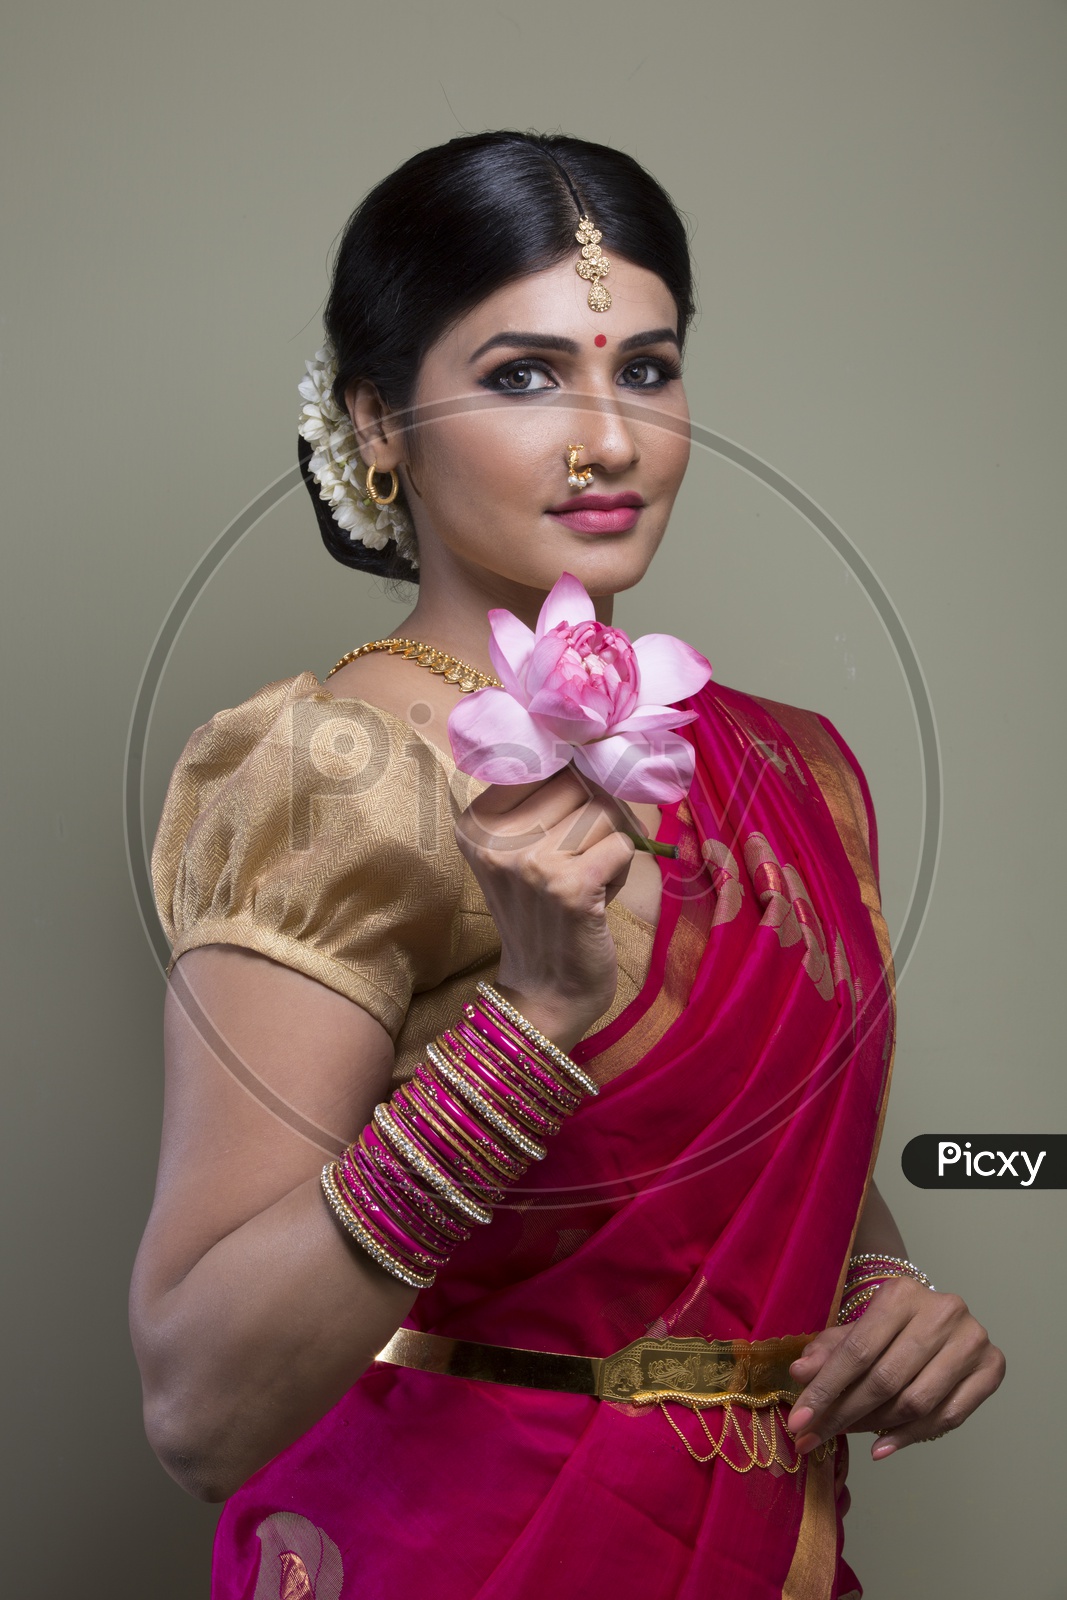 A Beautiful Indian Female Model  in Traditional Attire Wearing a Saree and Jewelry with an Expression and With a Lotus Flower in Hand  on an Studio Closeup shot